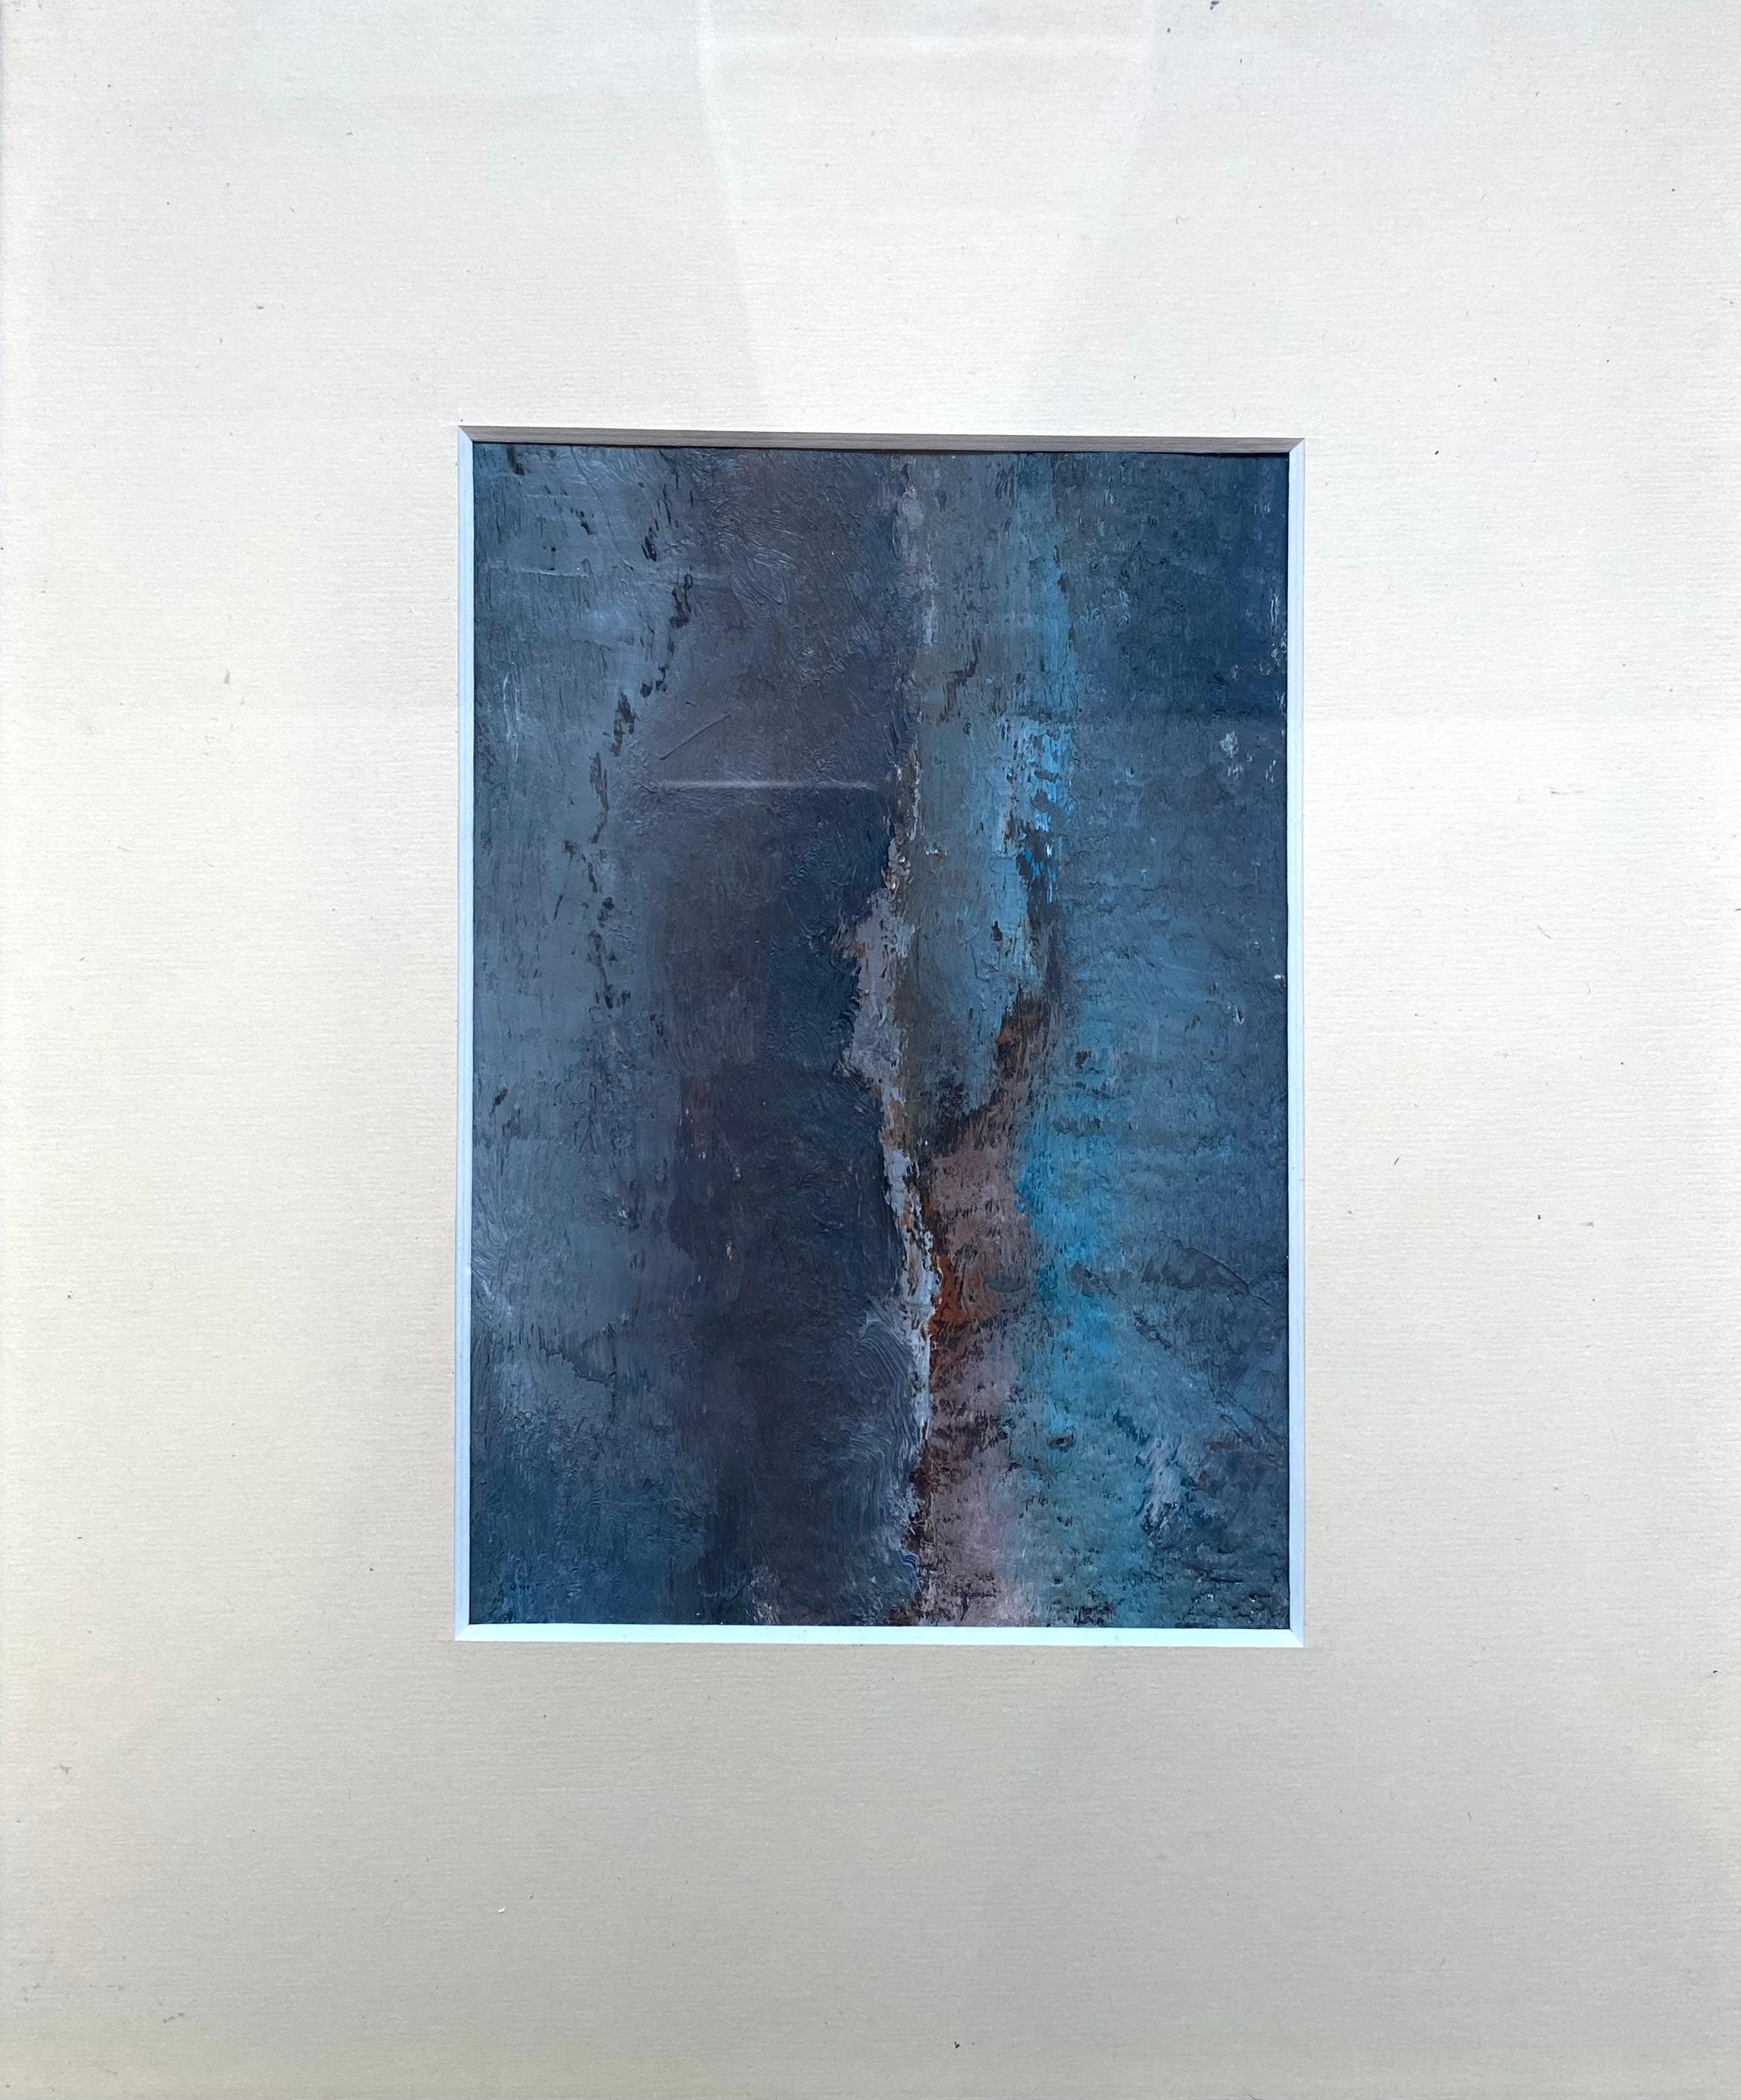 Blue and grey abstract composition n2 by Gilbert Pauli - Oil on canvas 19x24 cm For Sale 2